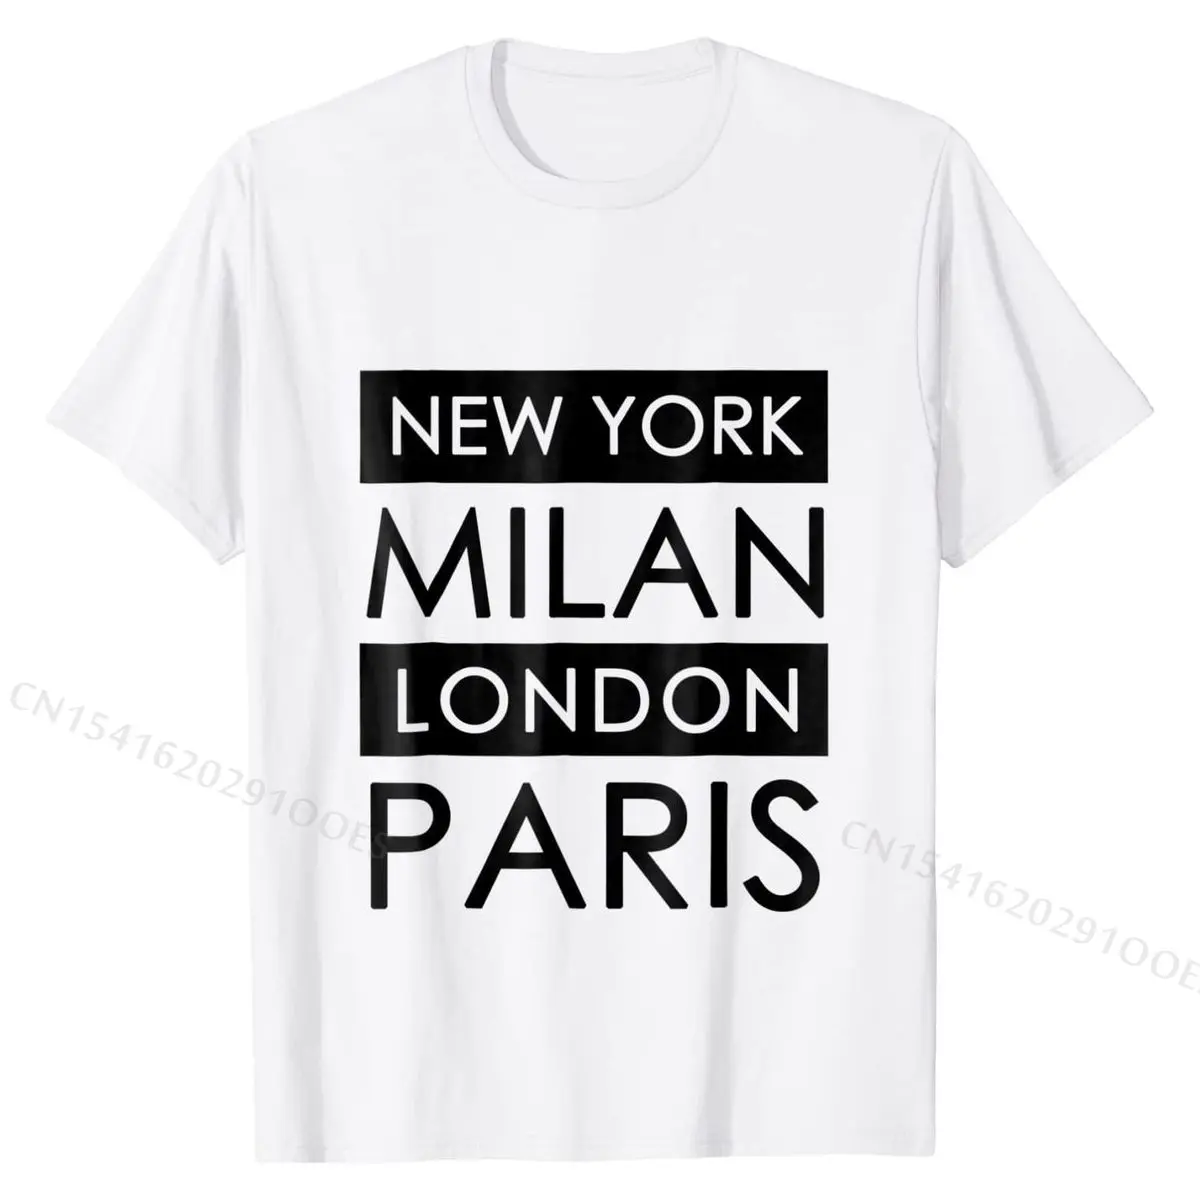 

T-Shirt, New York, Milan, London, Paris Fitted Men's T Shirt Casual Tops Shirts Cotton Party